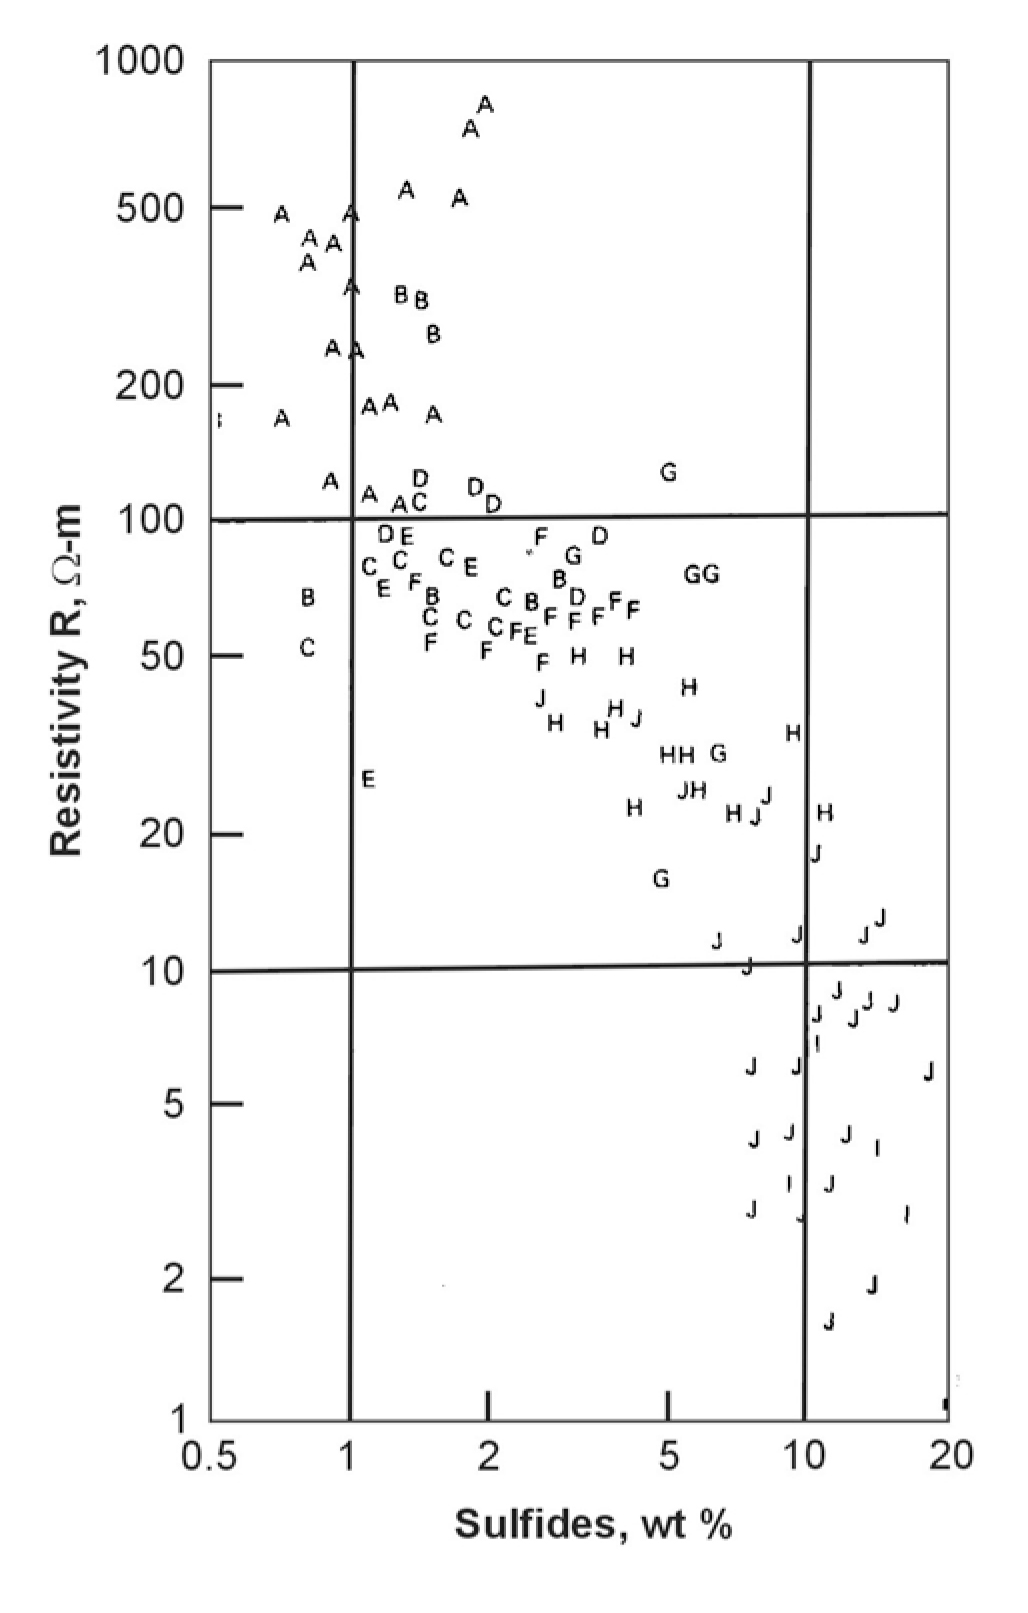 Electrical resistivity of rocks with various wt % of sulfide.  Samples each average over several cubic meters.